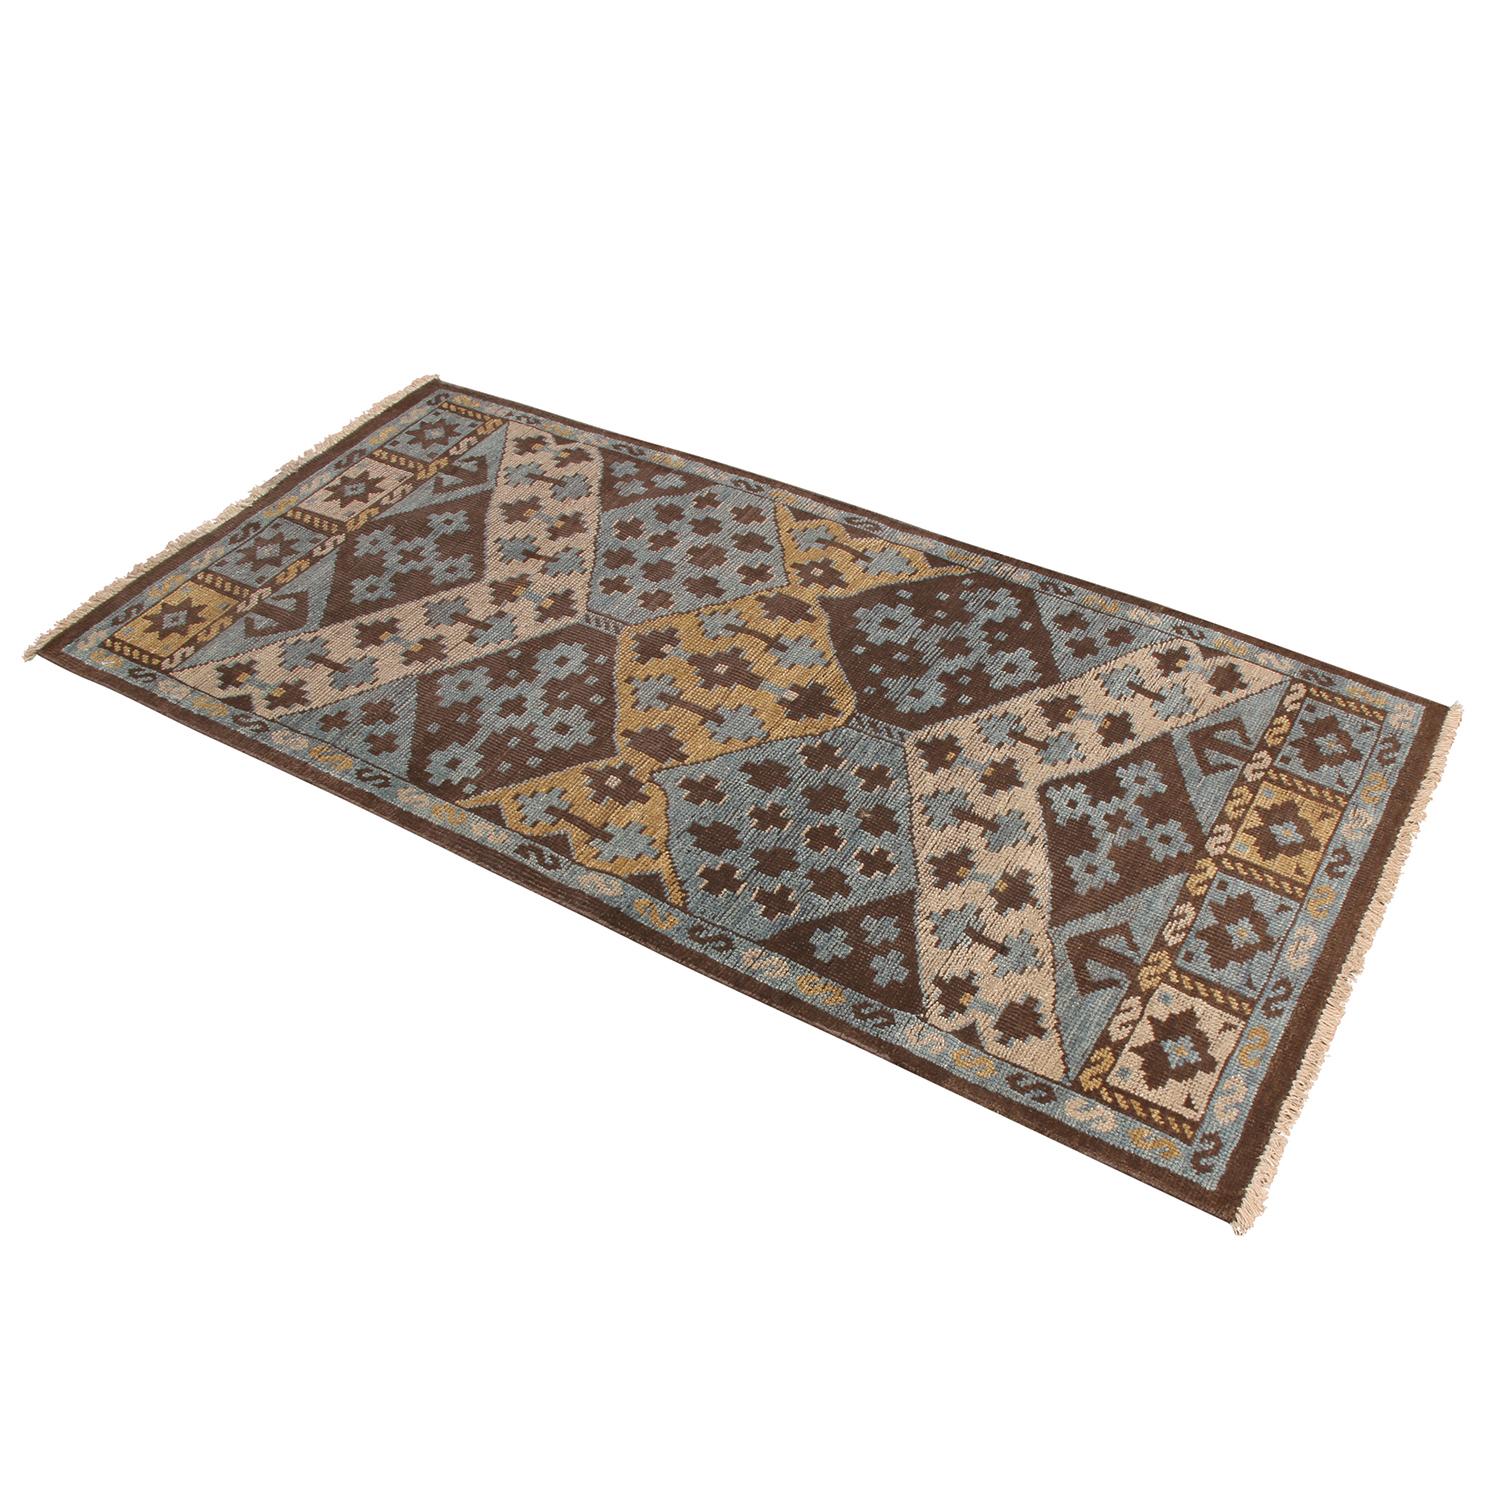 Originating from India, this hand knotted contemporary wool rug hails from Rug & Kilim’s premier Burano collection, enjoying a unique marriage of tribal patterns with more forgiving, versatile hues of brown, beige, blue, and golden-yellow